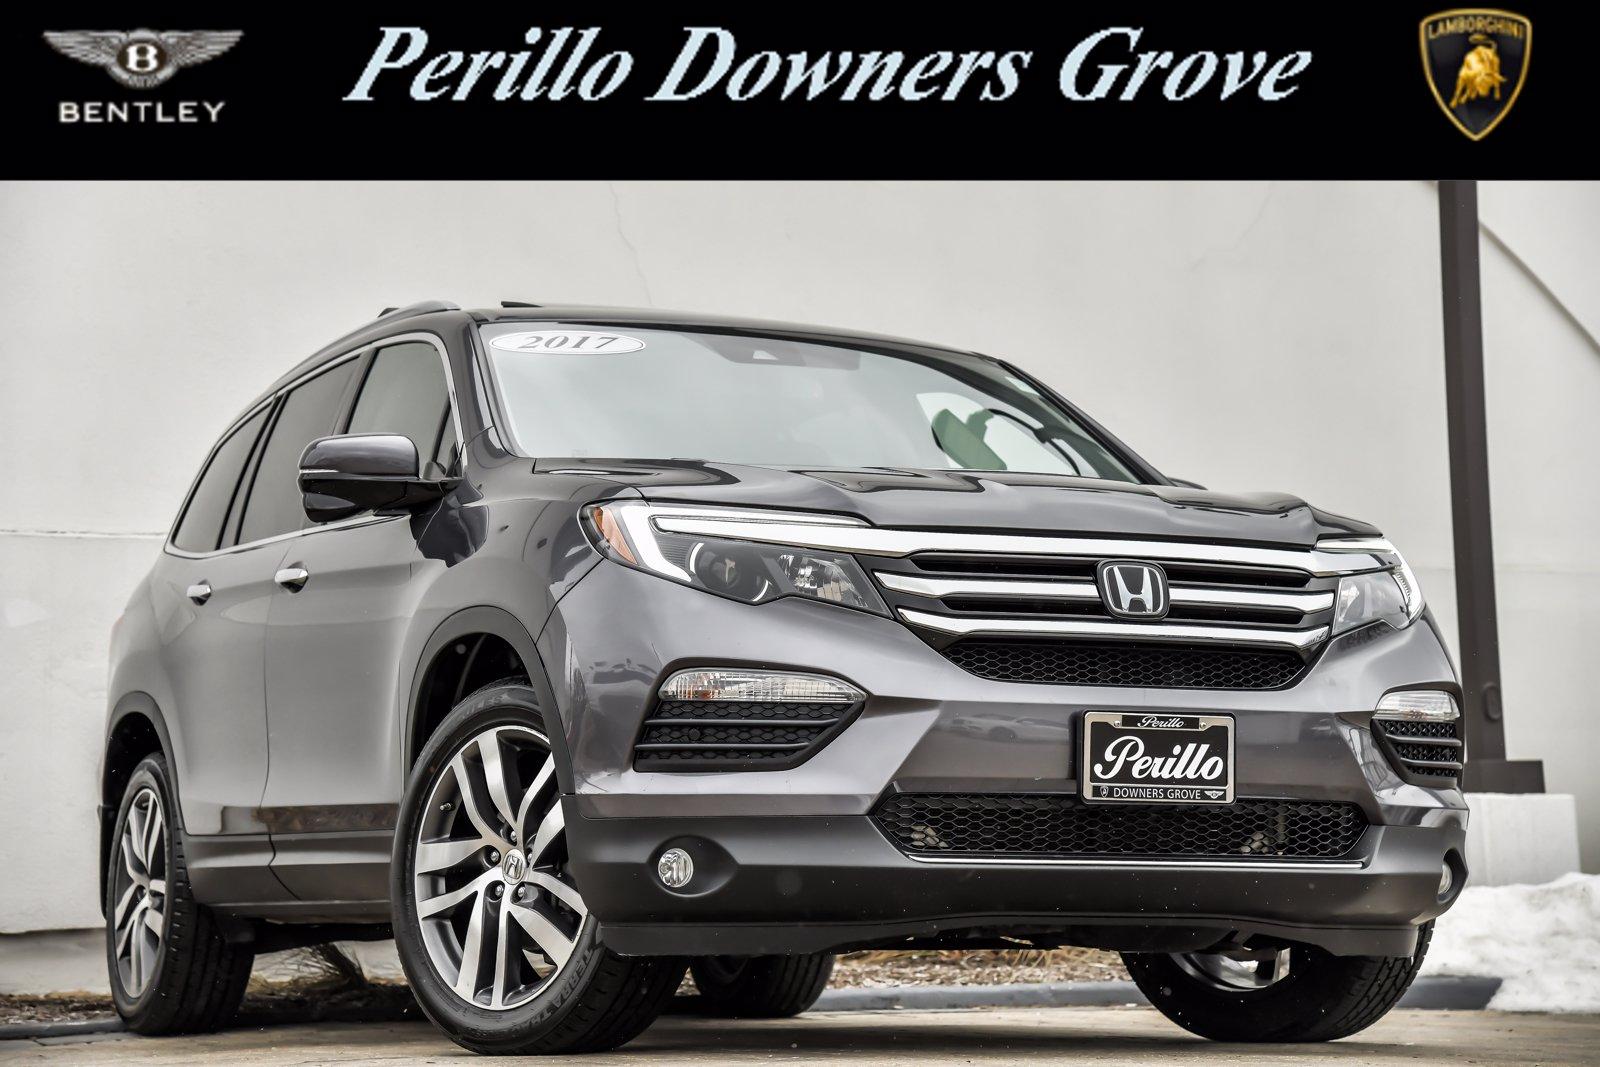 Used 2017 Honda Pilot Elite, 3rd Row, Rear Ent, | Downers Grove, IL